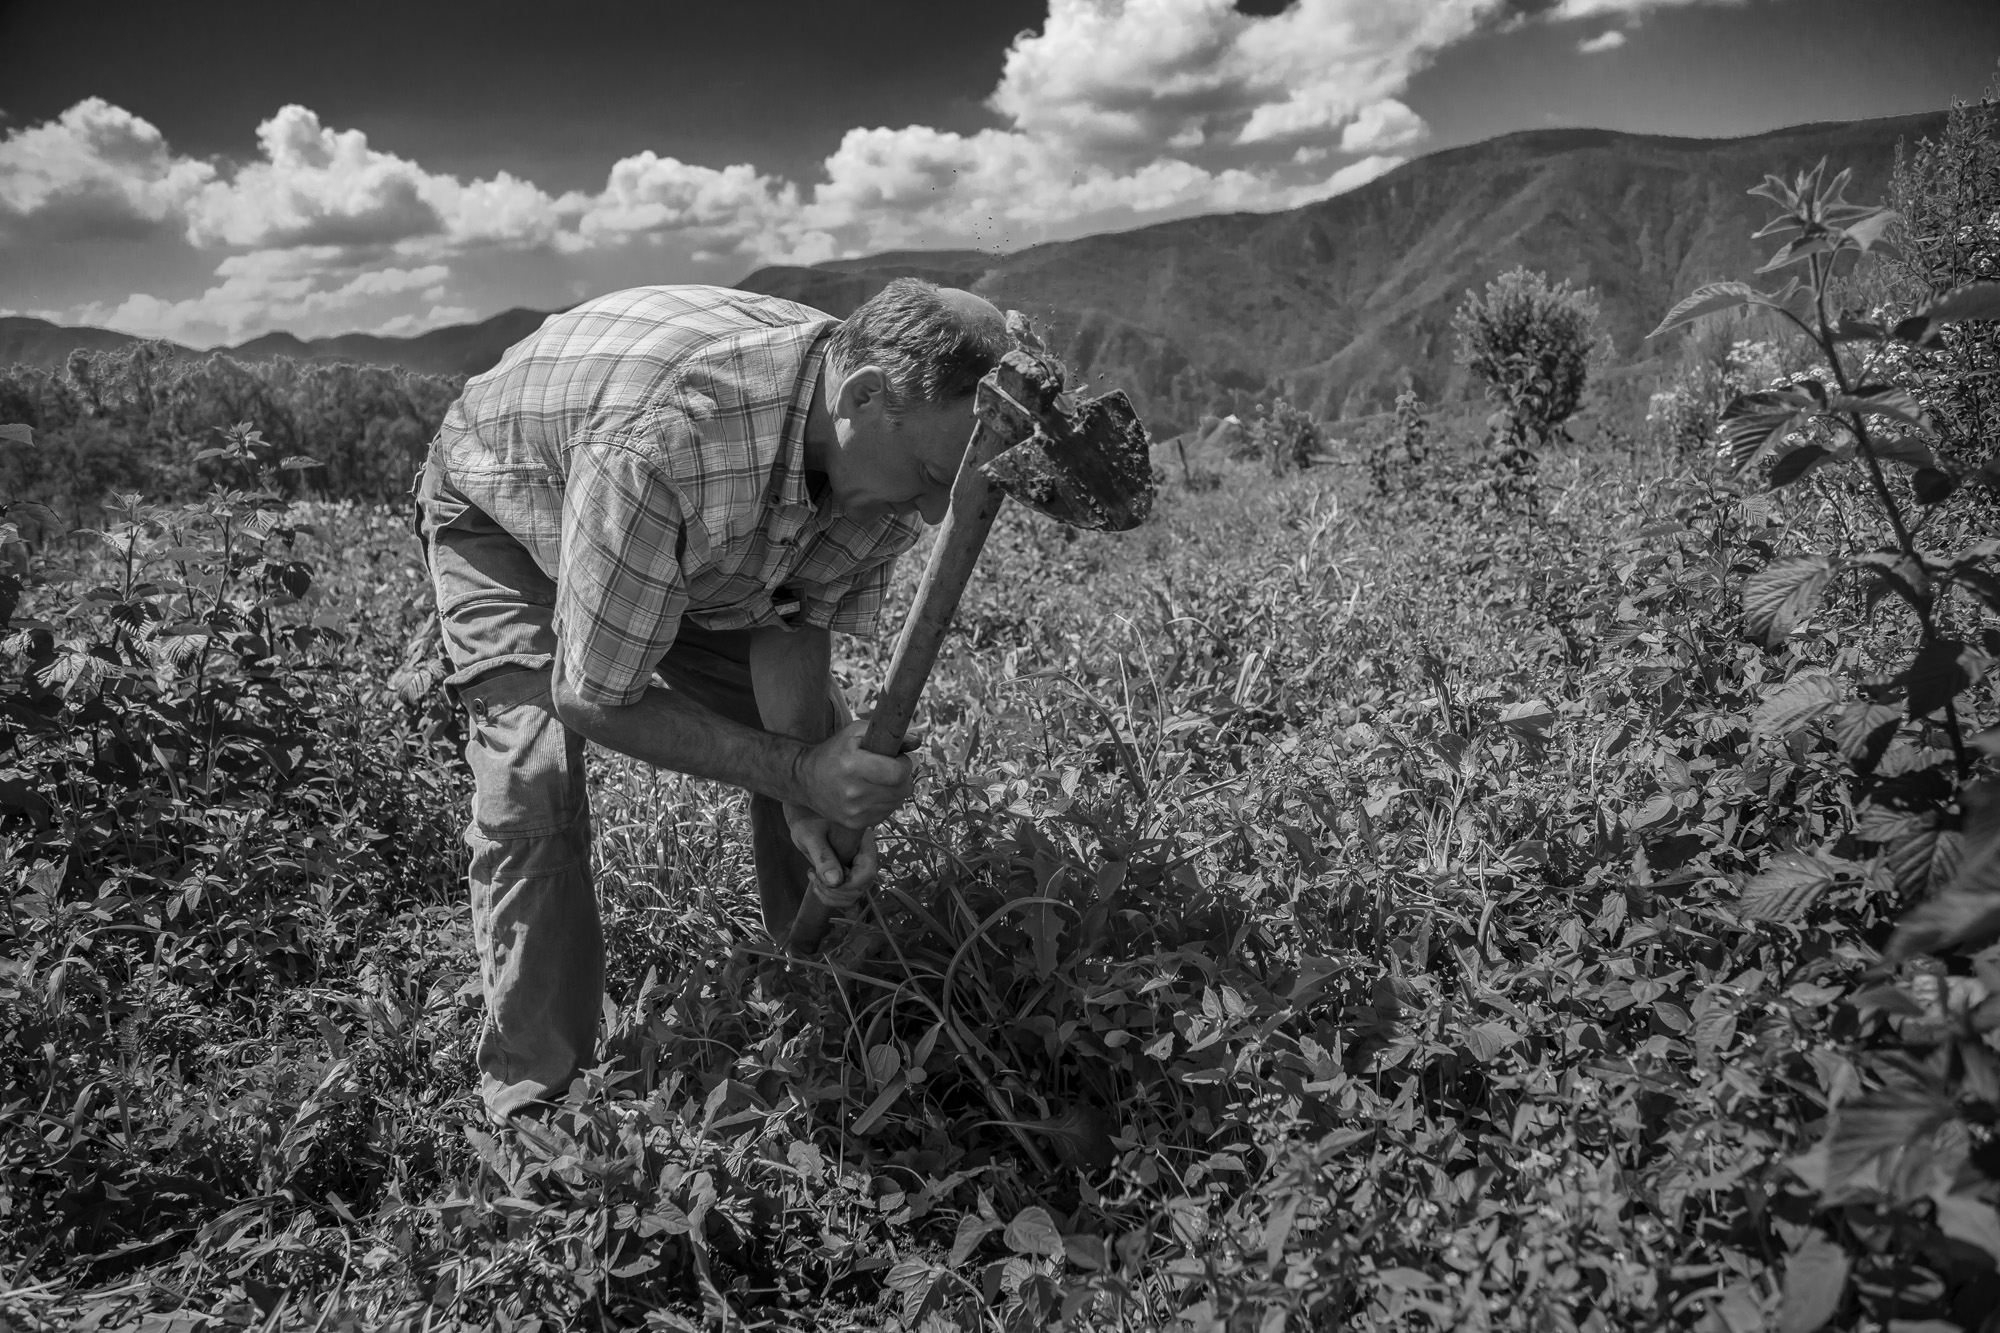 5. Bato, farmer and cook, harvesting his organic vegetables